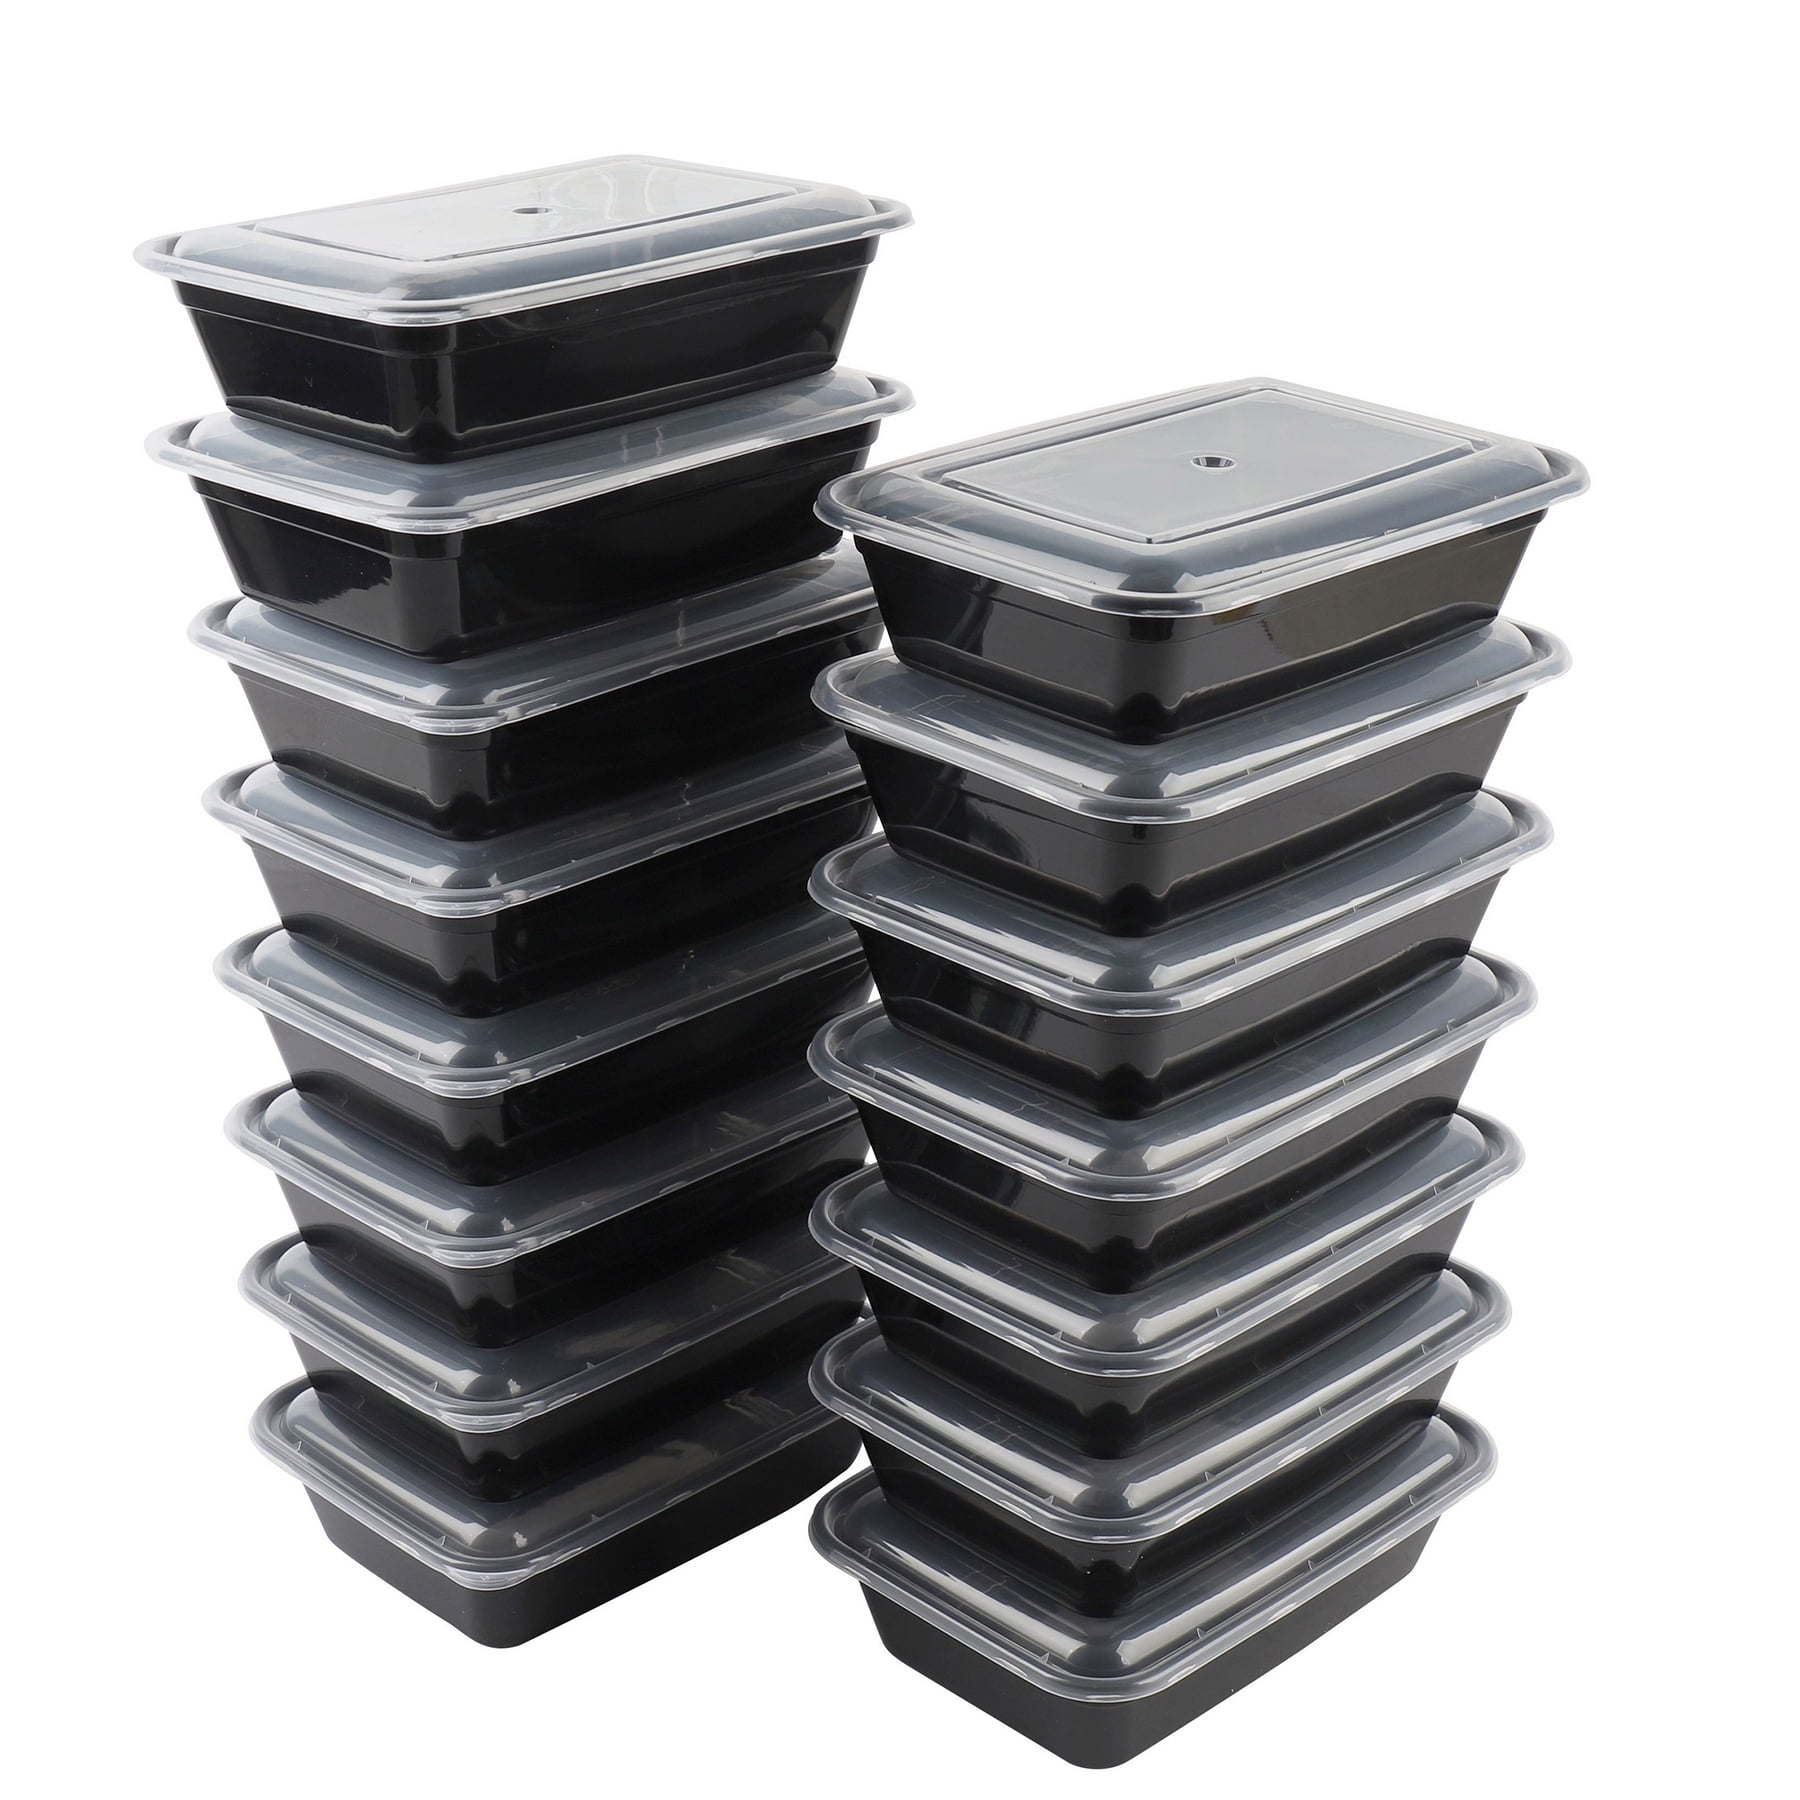 MUCHII [30 Pack] 34 oz Disposable Christmas Meal Prep Container With Lids,  Disposable To Go Containers With Lids, Resuable Food Prep Containers With  Lids, Disposable Lunch Containers Microwave and Freezer Safe